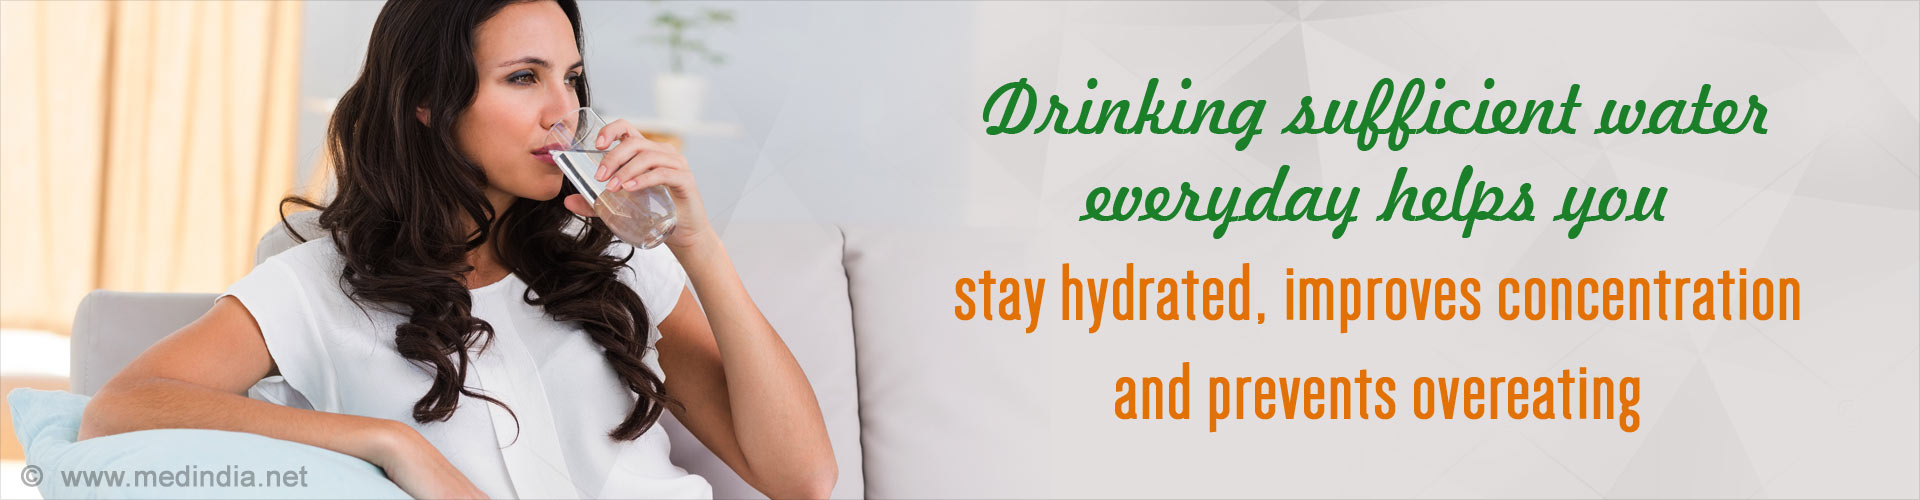 Drinking sufficient water everyday helps you stay hydrated, improves concentration and prevents overeating
